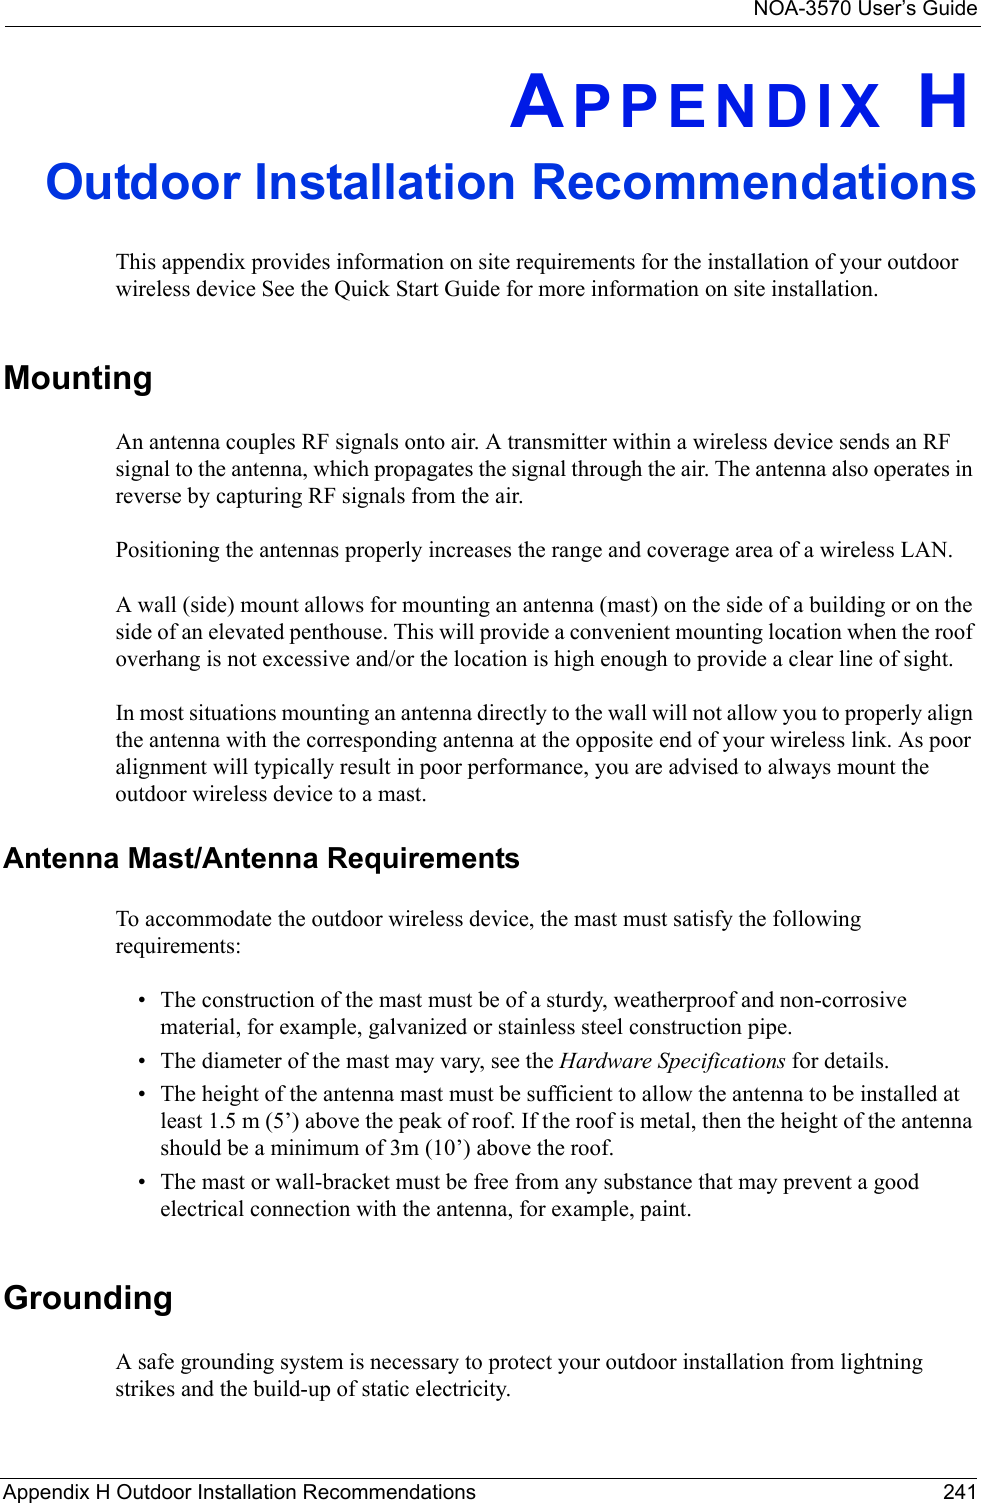 NOA-3570 User’s GuideAppendix H Outdoor Installation Recommendations 241APPENDIX HOutdoor Installation RecommendationsThis appendix provides information on site requirements for the installation of your outdoor wireless device See the Quick Start Guide for more information on site installation.MountingAn antenna couples RF signals onto air. A transmitter within a wireless device sends an RF signal to the antenna, which propagates the signal through the air. The antenna also operates in reverse by capturing RF signals from the air. Positioning the antennas properly increases the range and coverage area of a wireless LAN. A wall (side) mount allows for mounting an antenna (mast) on the side of a building or on the side of an elevated penthouse. This will provide a convenient mounting location when the roof overhang is not excessive and/or the location is high enough to provide a clear line of sight.In most situations mounting an antenna directly to the wall will not allow you to properly align the antenna with the corresponding antenna at the opposite end of your wireless link. As poor alignment will typically result in poor performance, you are advised to always mount the outdoor wireless device to a mast.Antenna Mast/Antenna RequirementsTo accommodate the outdoor wireless device, the mast must satisfy the following requirements:• The construction of the mast must be of a sturdy, weatherproof and non-corrosive material, for example, galvanized or stainless steel construction pipe.• The diameter of the mast may vary, see the Hardware Specifications for details.• The height of the antenna mast must be sufficient to allow the antenna to be installed at least 1.5 m (5’) above the peak of roof. If the roof is metal, then the height of the antenna should be a minimum of 3m (10’) above the roof.• The mast or wall-bracket must be free from any substance that may prevent a good electrical connection with the antenna, for example, paint.GroundingA safe grounding system is necessary to protect your outdoor installation from lightning strikes and the build-up of static electricity.